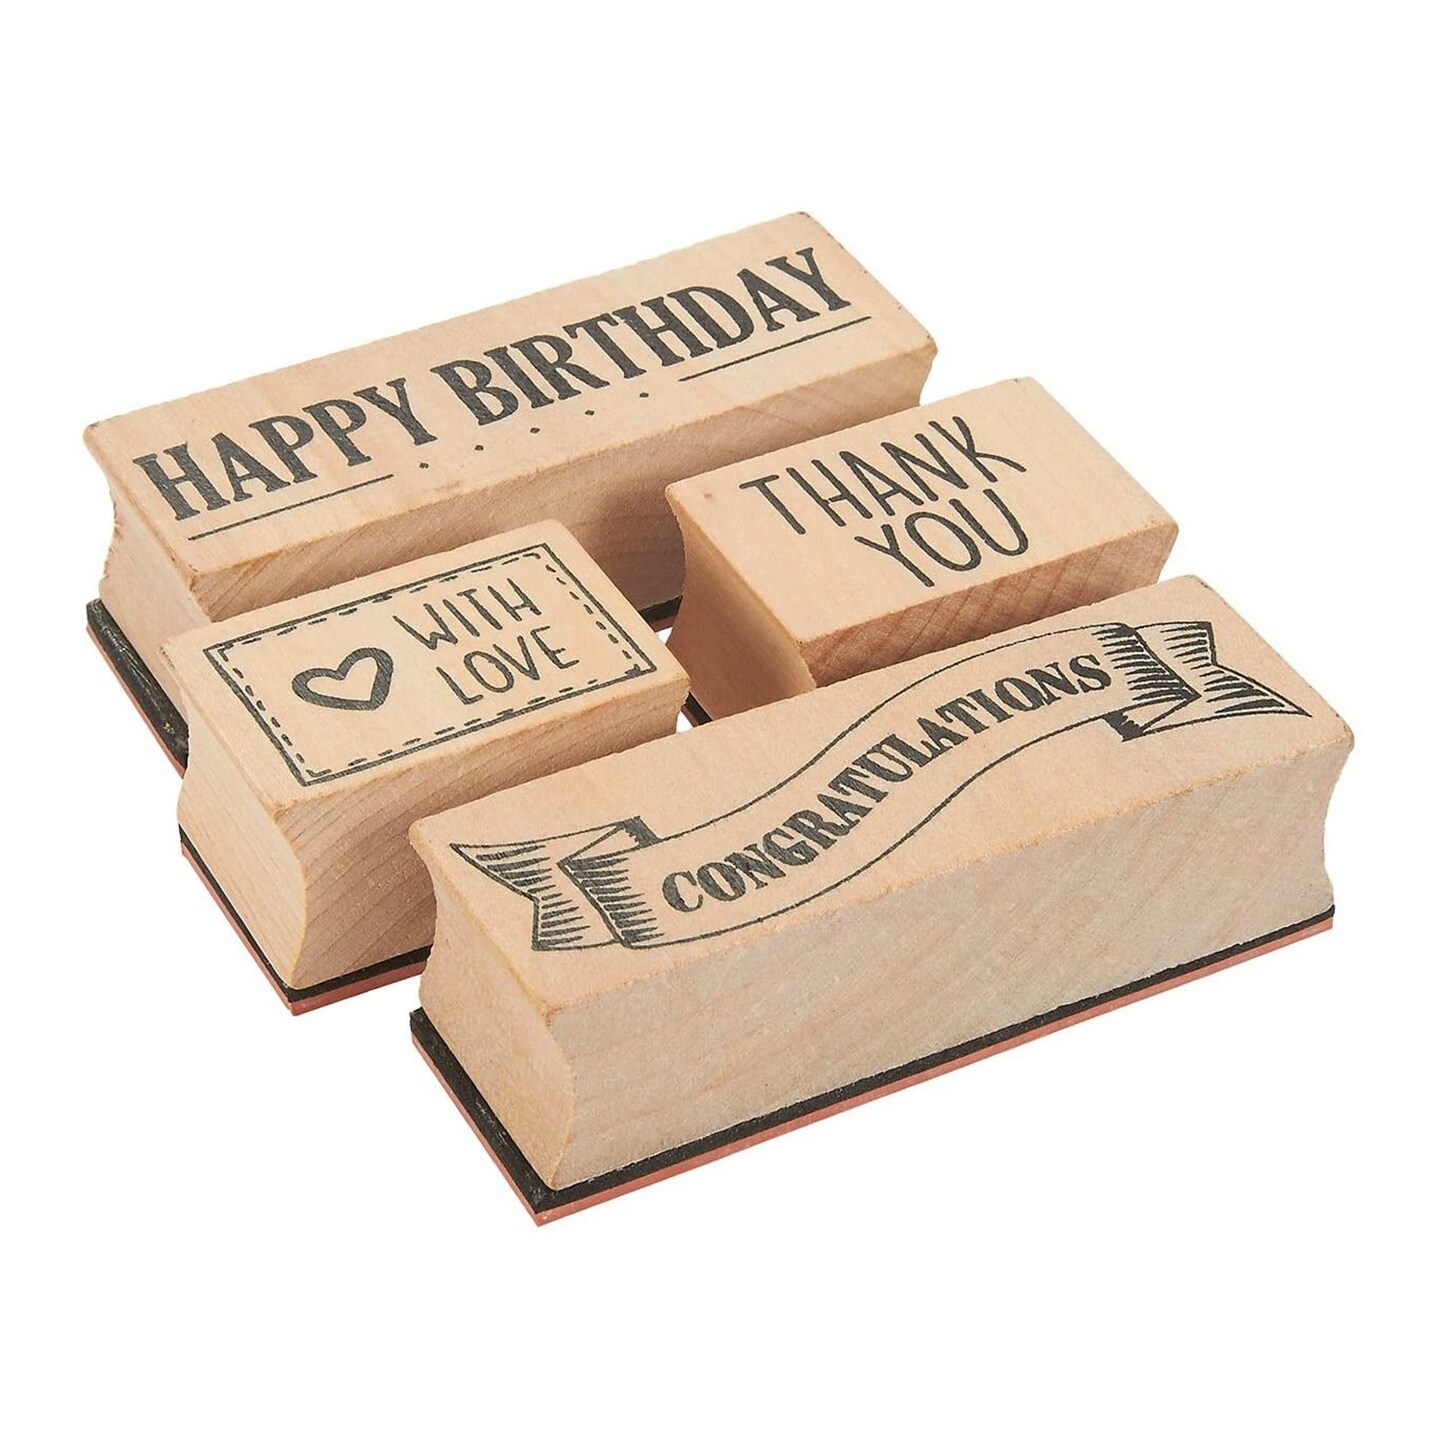 HAPPY BIRTHDAY 1 STATIC MOUNTED RUBBER STAMP